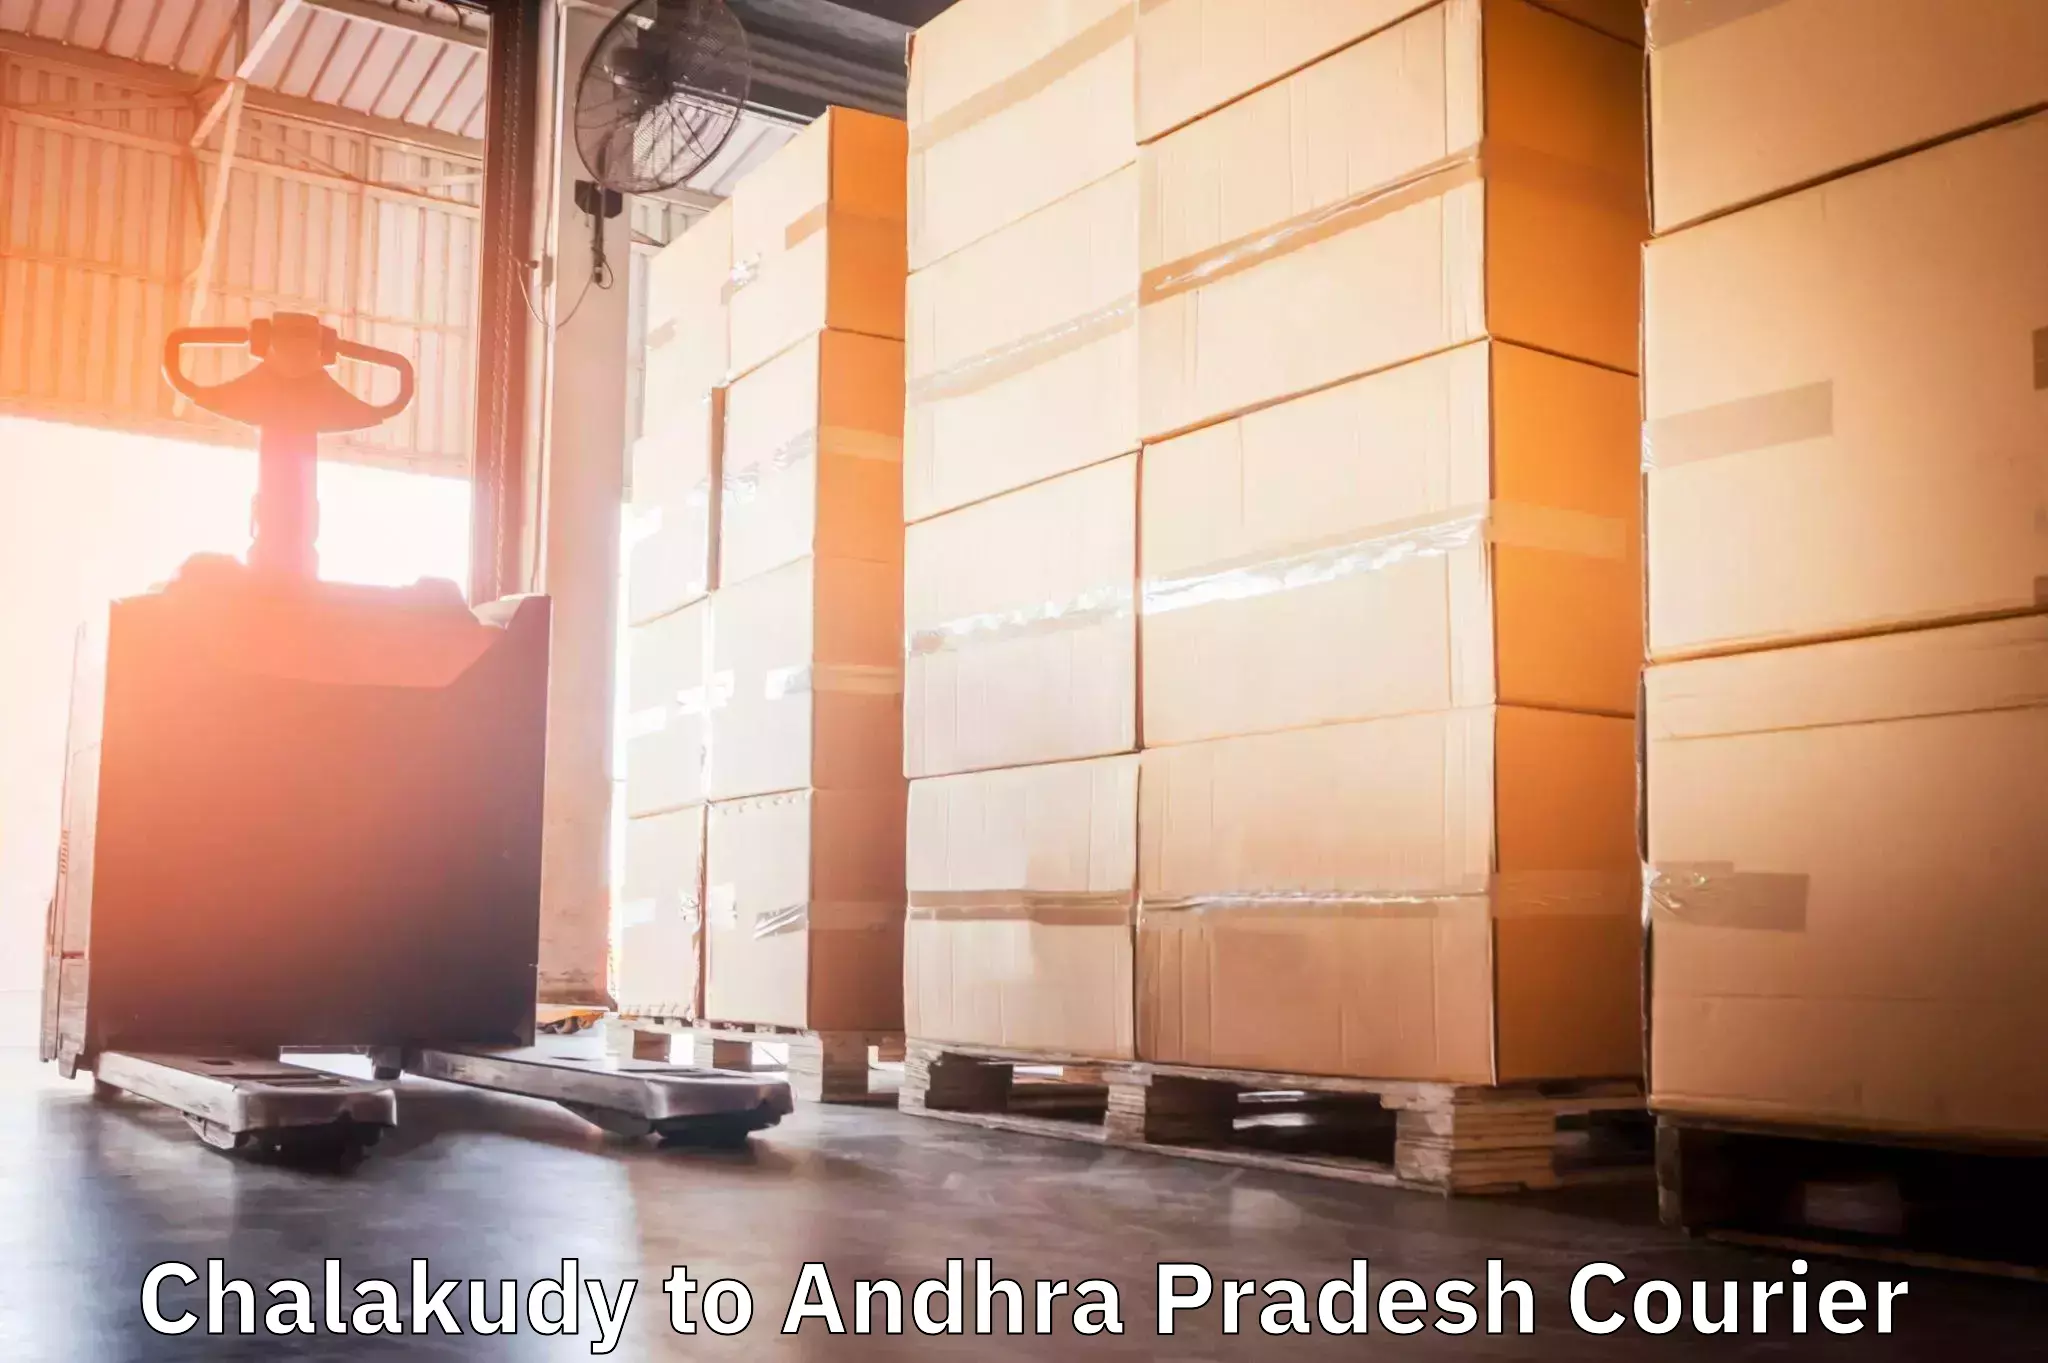 Speedy delivery service Chalakudy to Andhra Pradesh